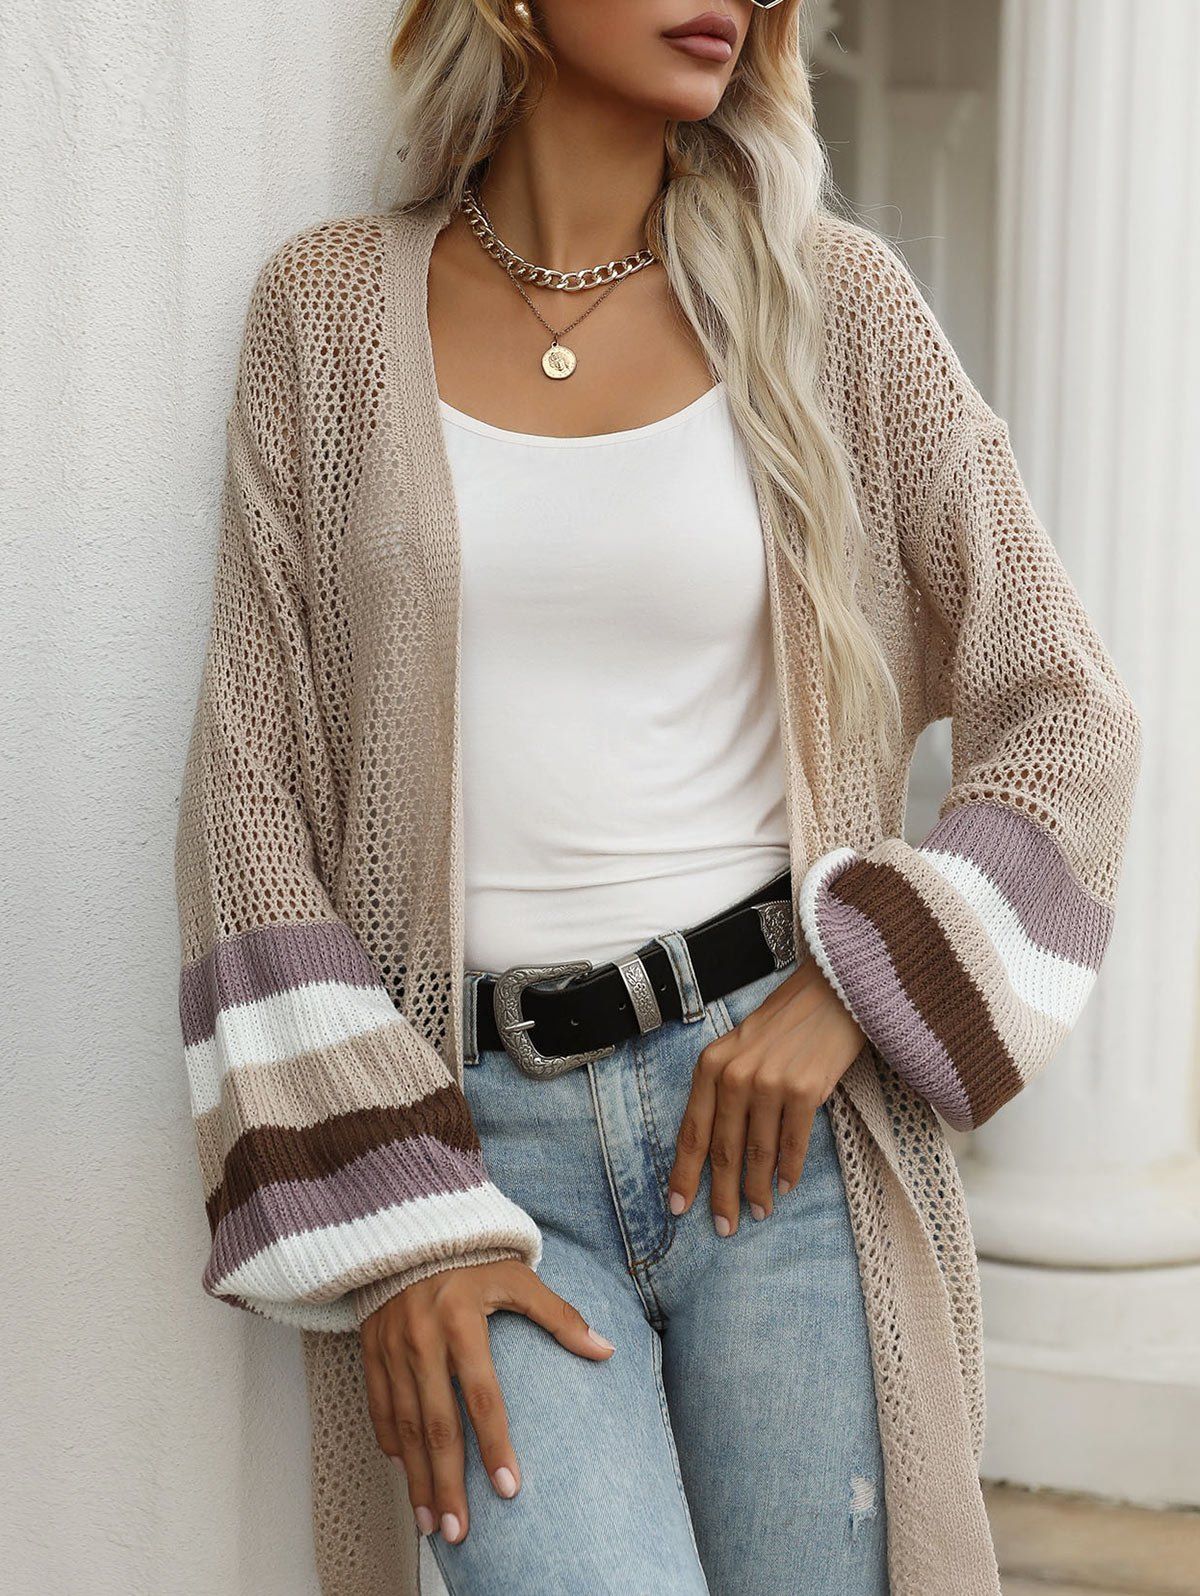 Pointelle Knit Stripes Panel Open Front Cardigan - LIGHT COFFEE L